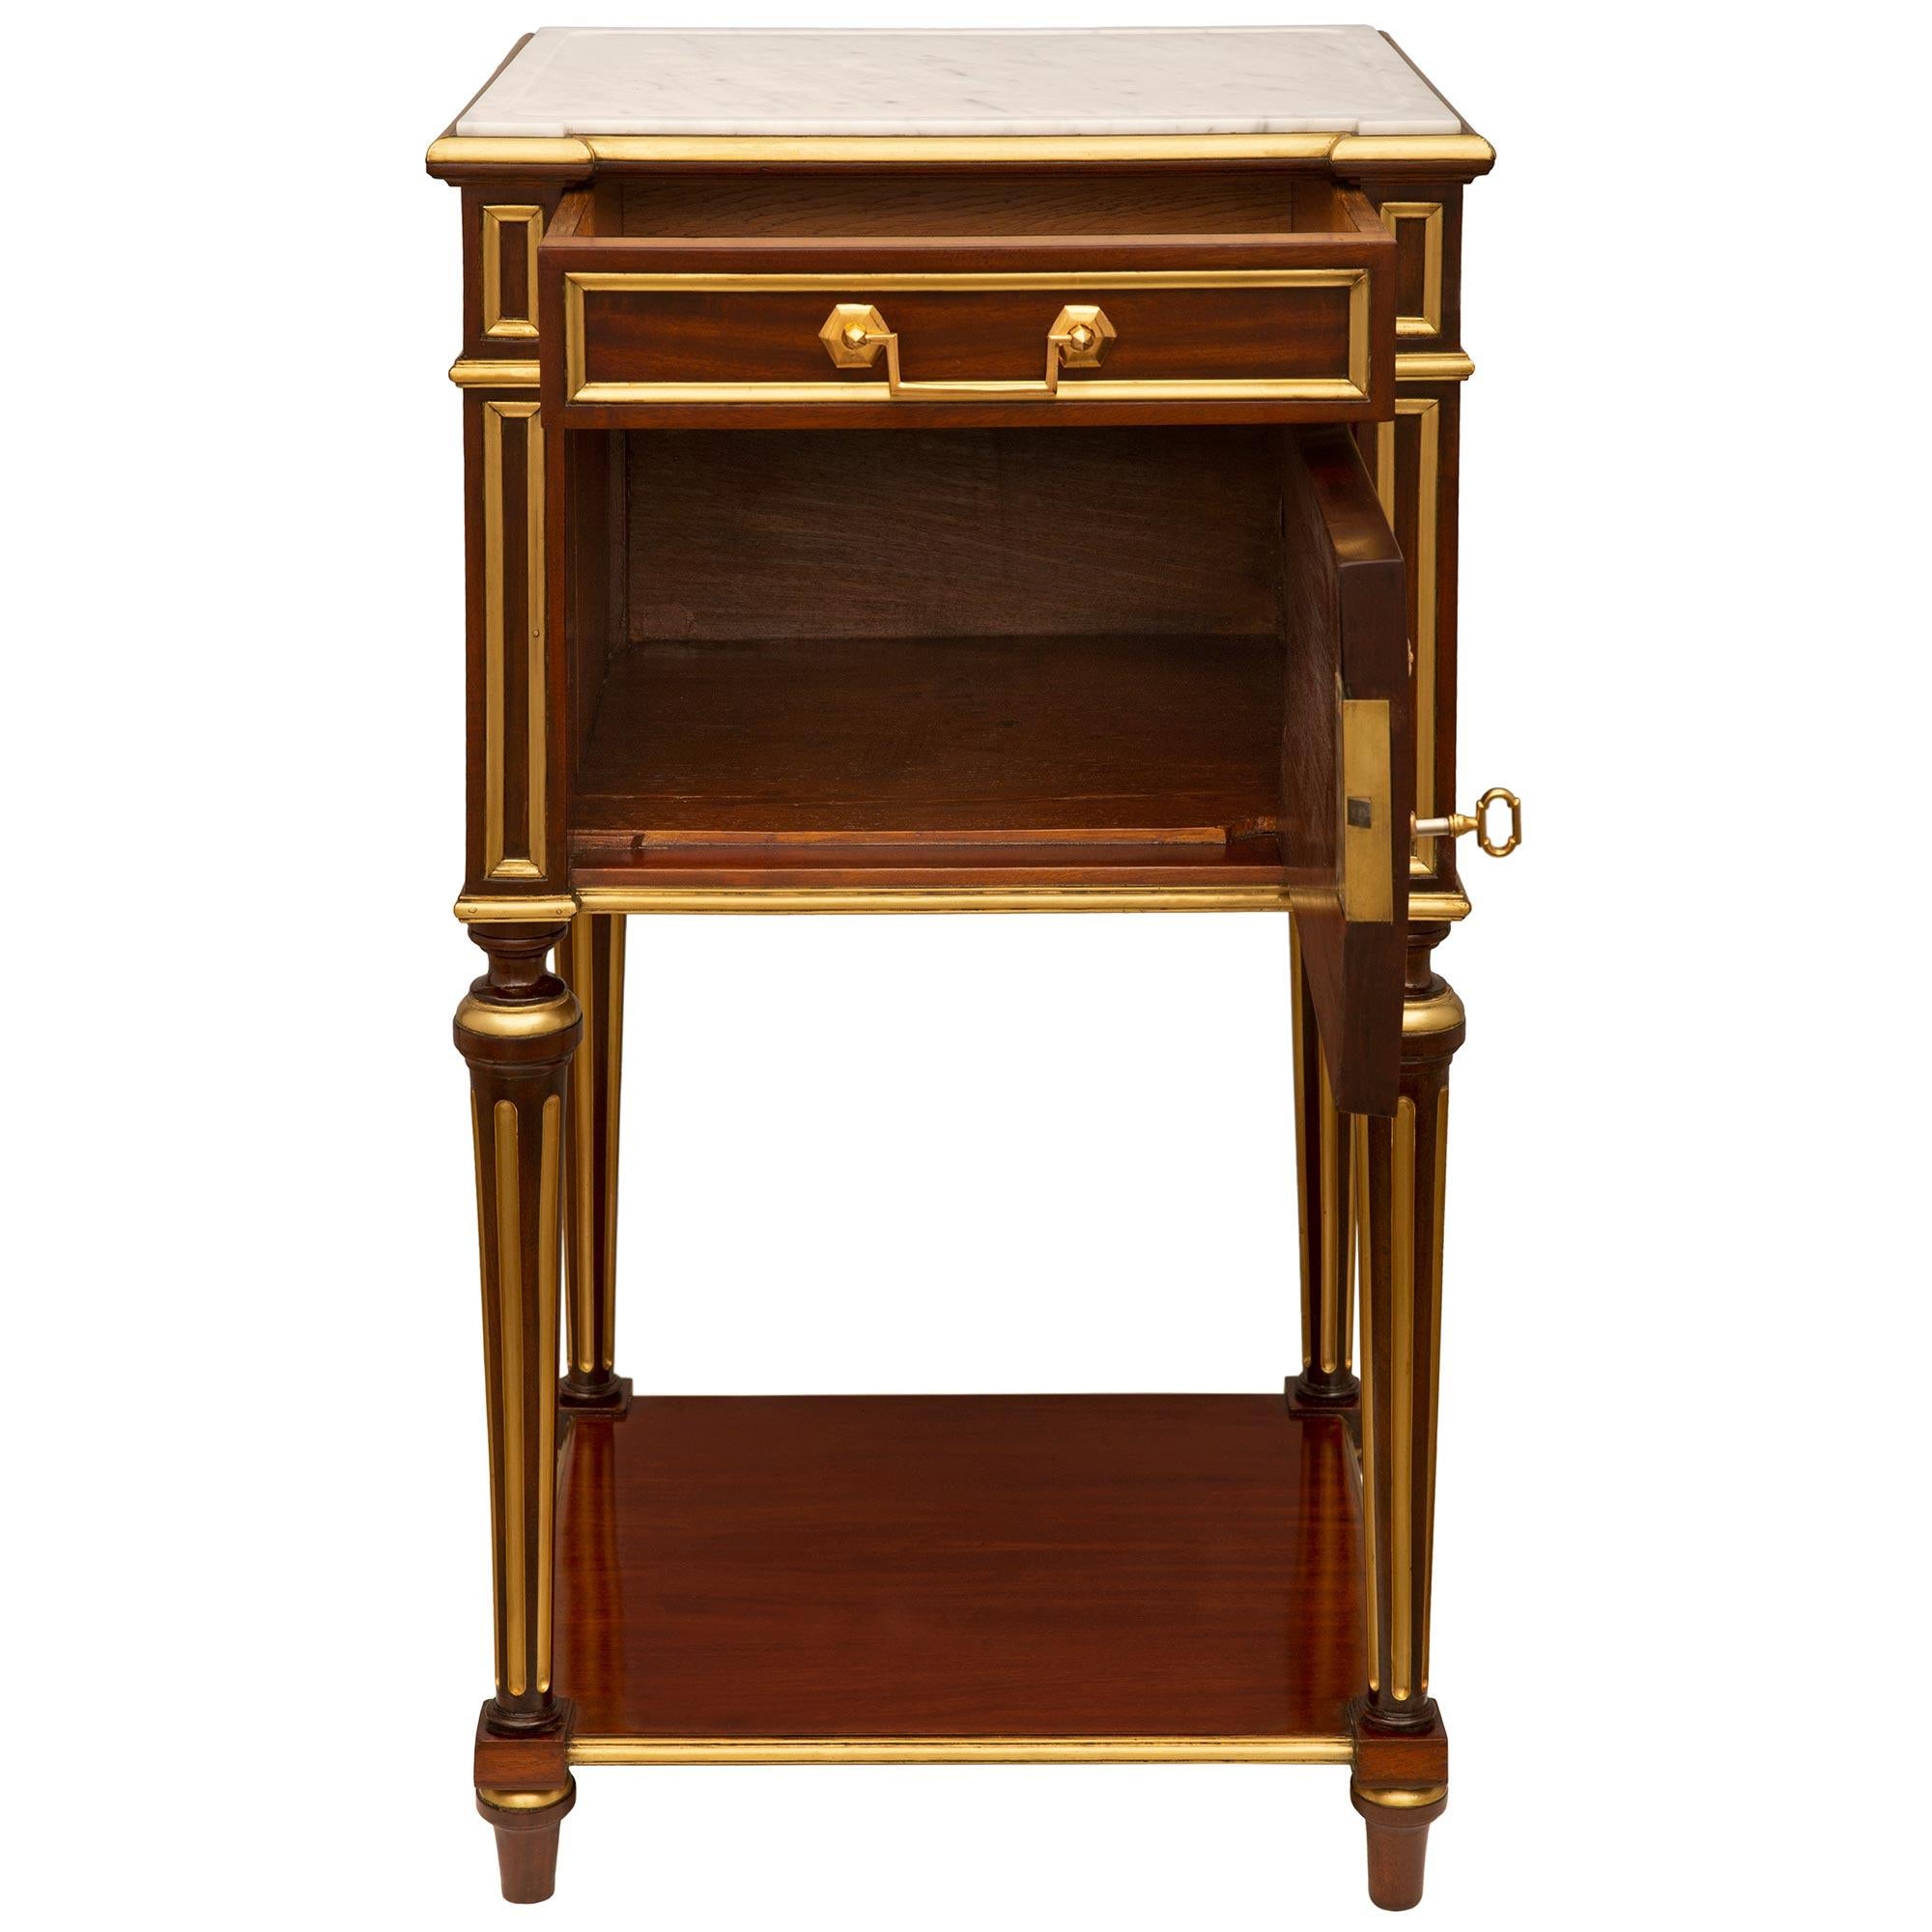 An elegant pair of French 19th century Louis XVI st. Mahogany, Brass, Ormolu and white Carrara marble side tables. The tables are raised on elegant topie shaped feet with brass rings connected by a square Mahogany stretcher, all below the circular